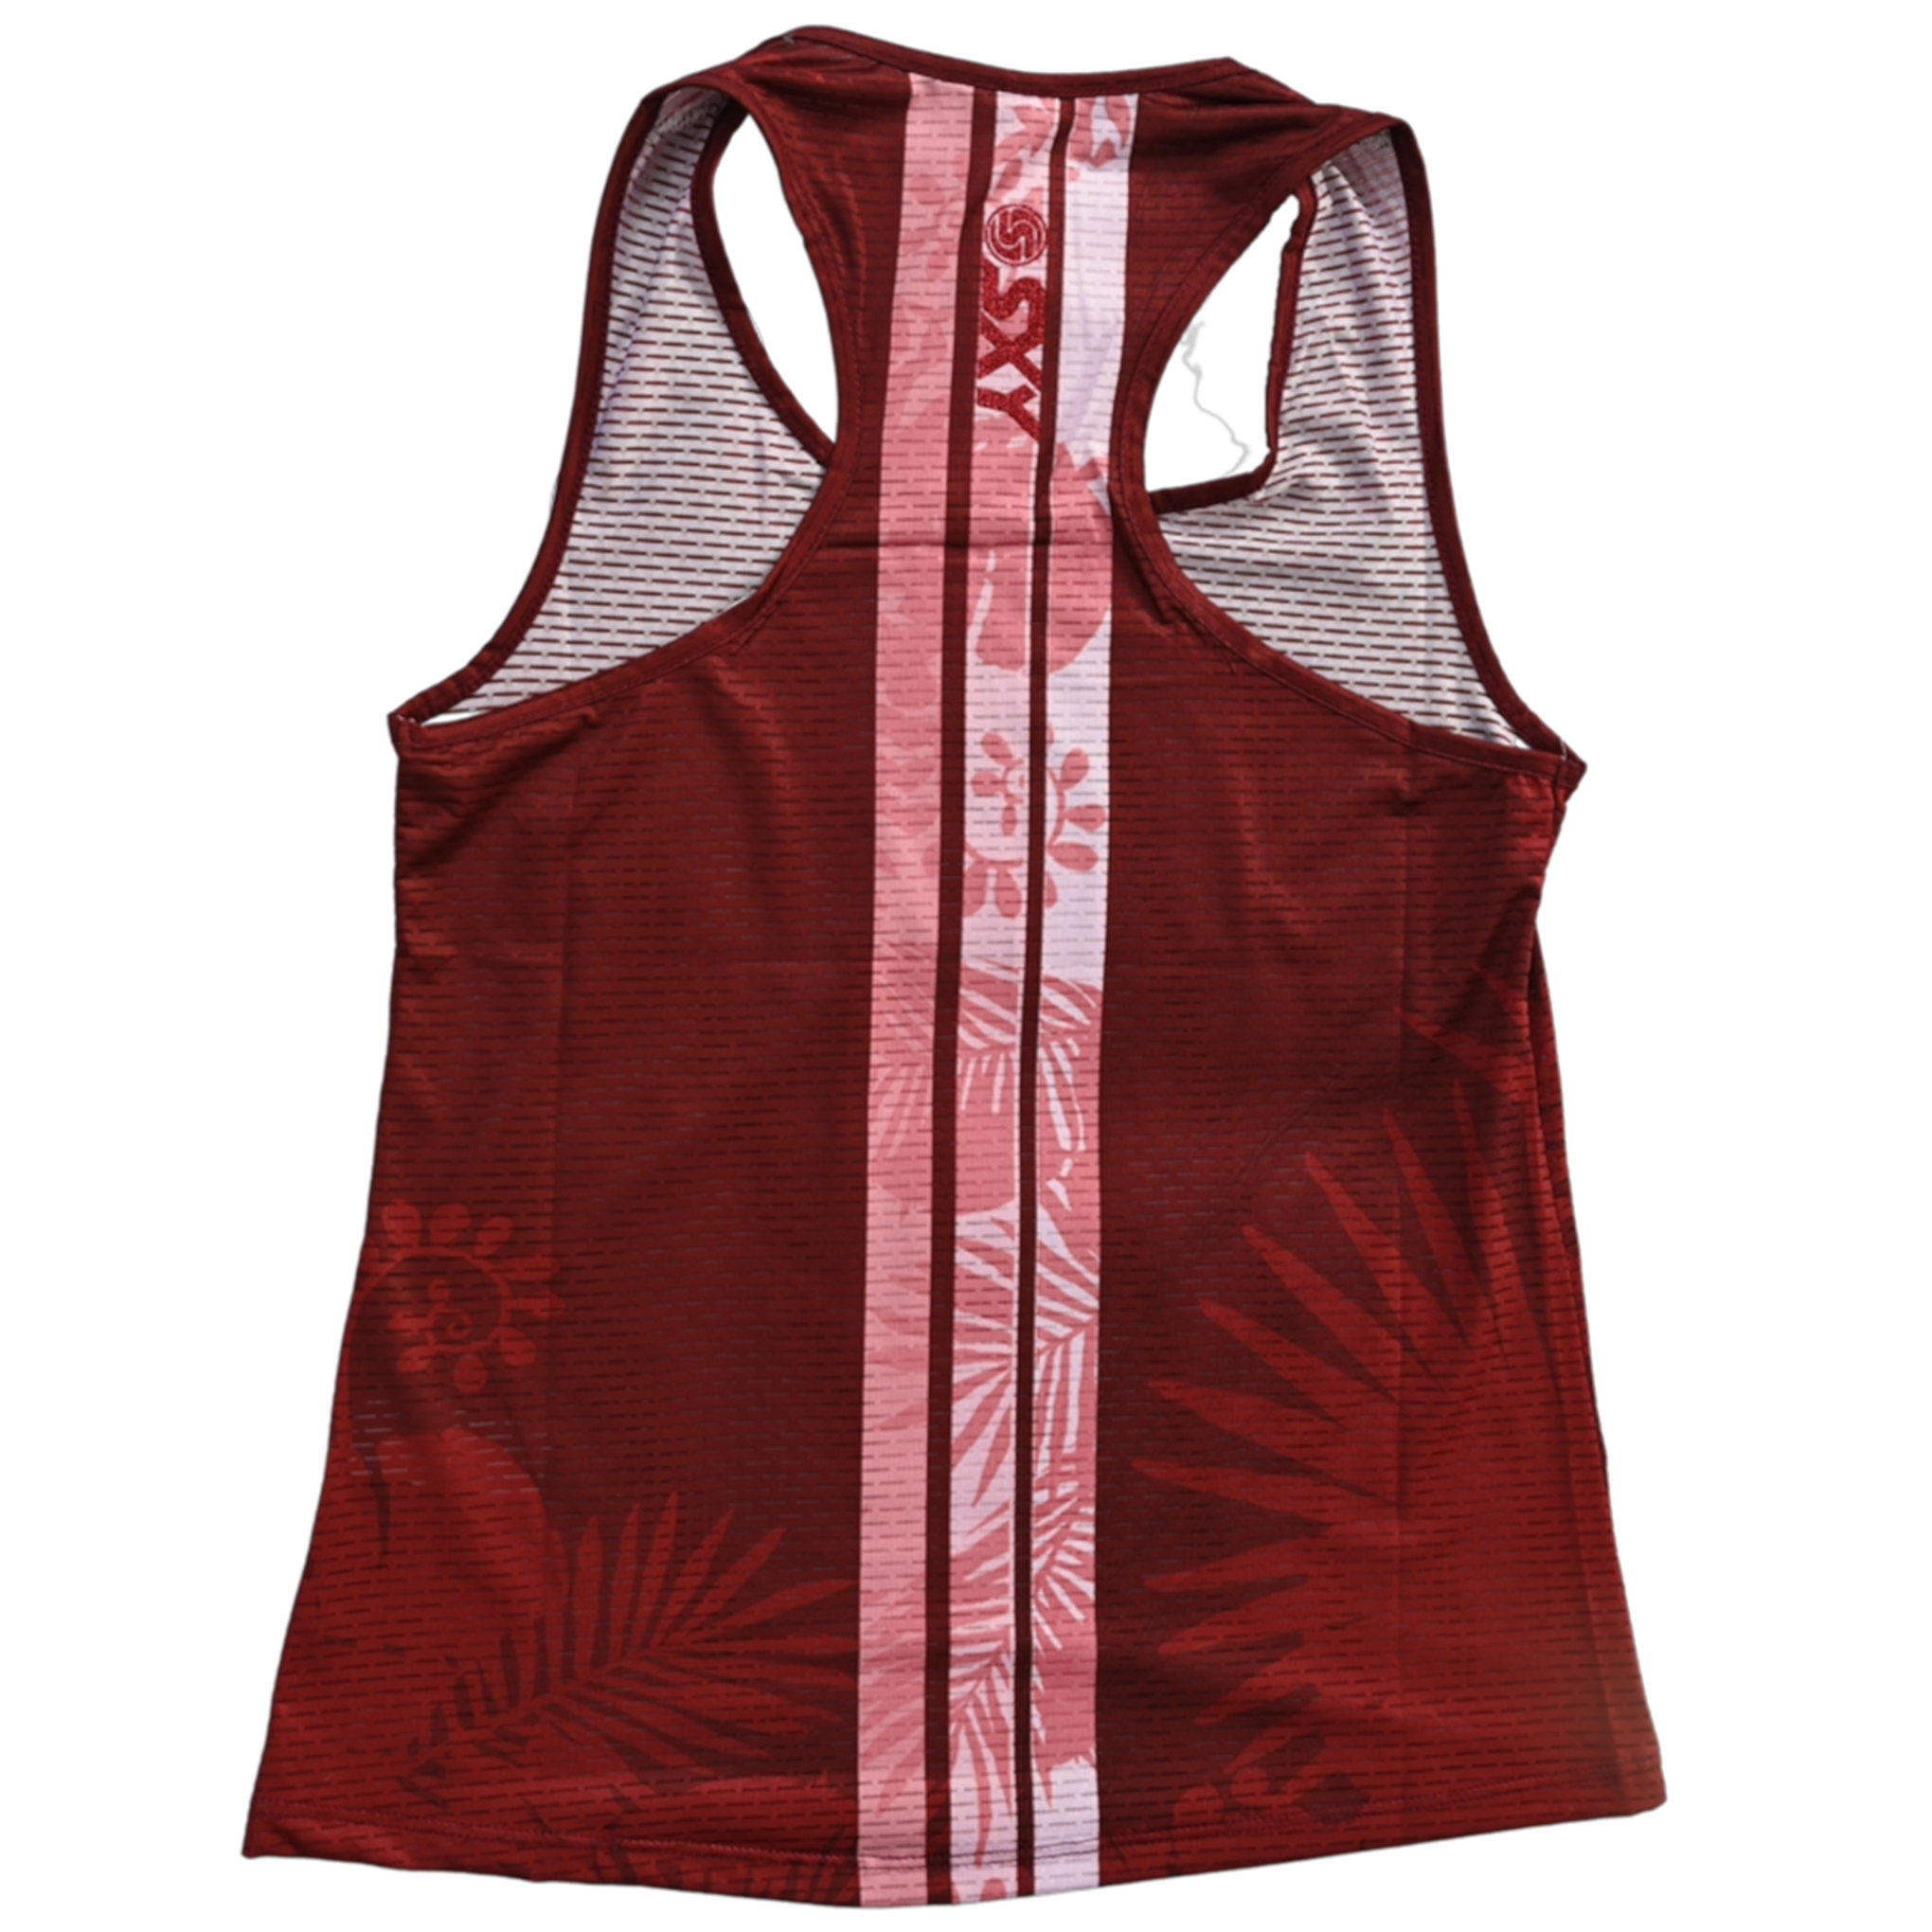 SEXY BRAND Women's SXY NKD Competition Tank in Red Wine